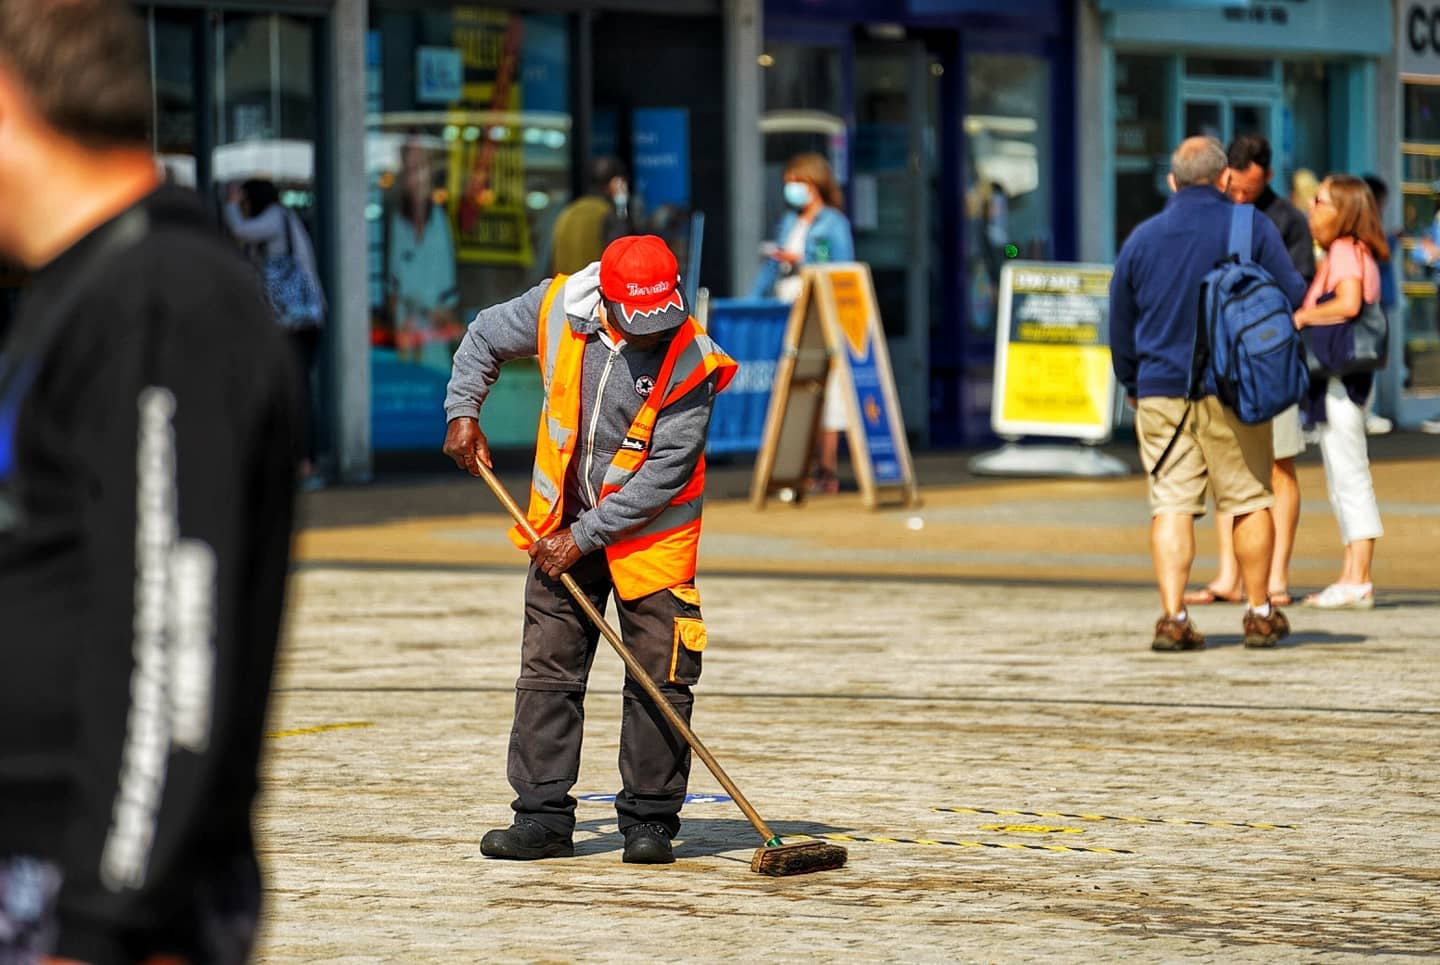 A colourful image showing a high street focusing on one man in a hi vis jacket sweeping the bricked floor on a dry cold day.